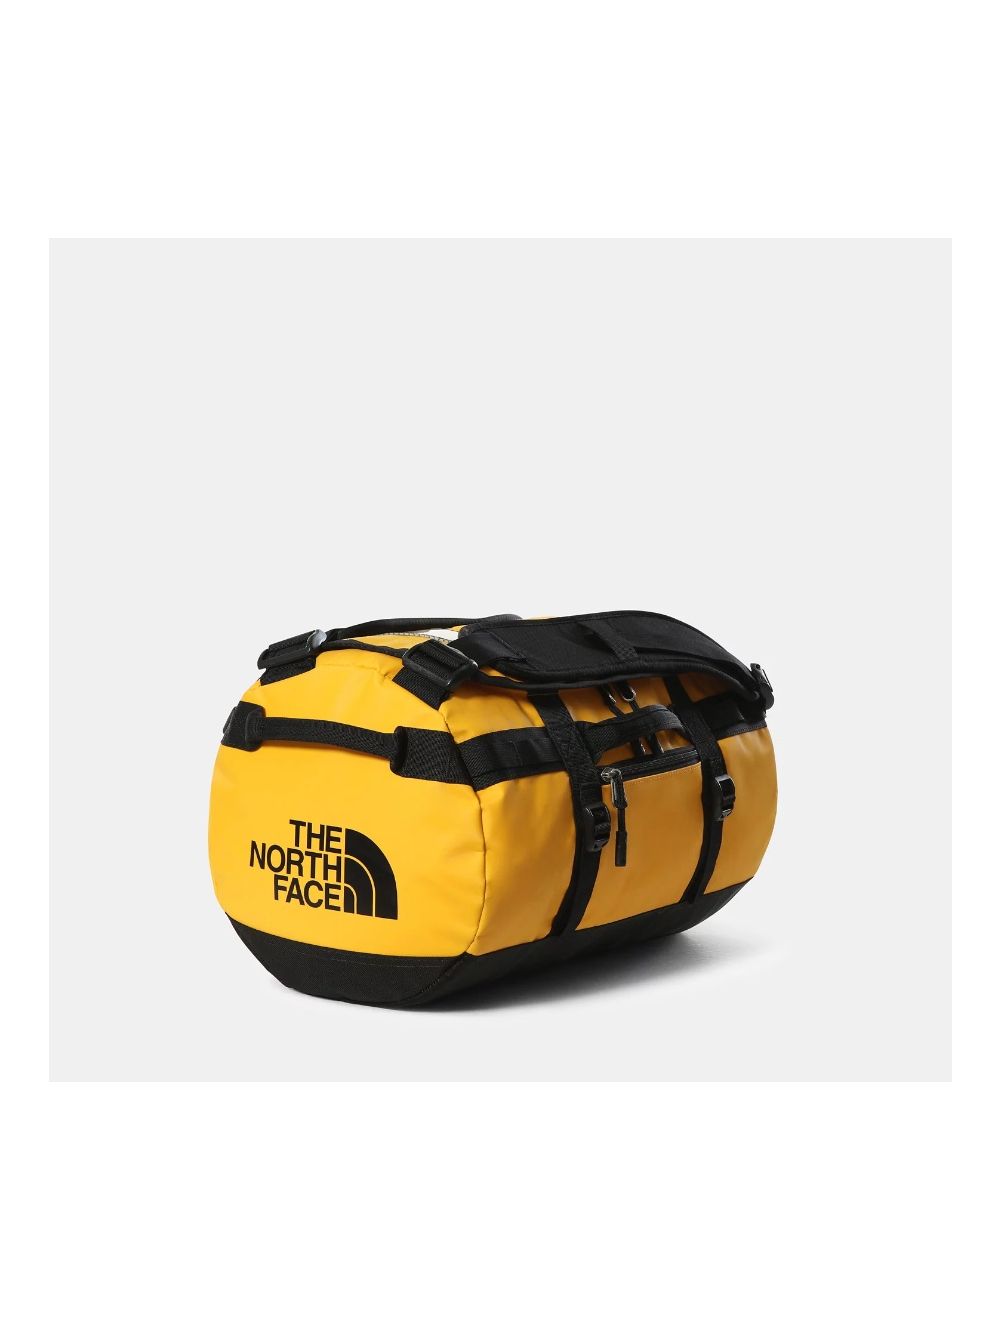 The North Face Base Camp Duffel Duurzame tas van gerecycled materiaal